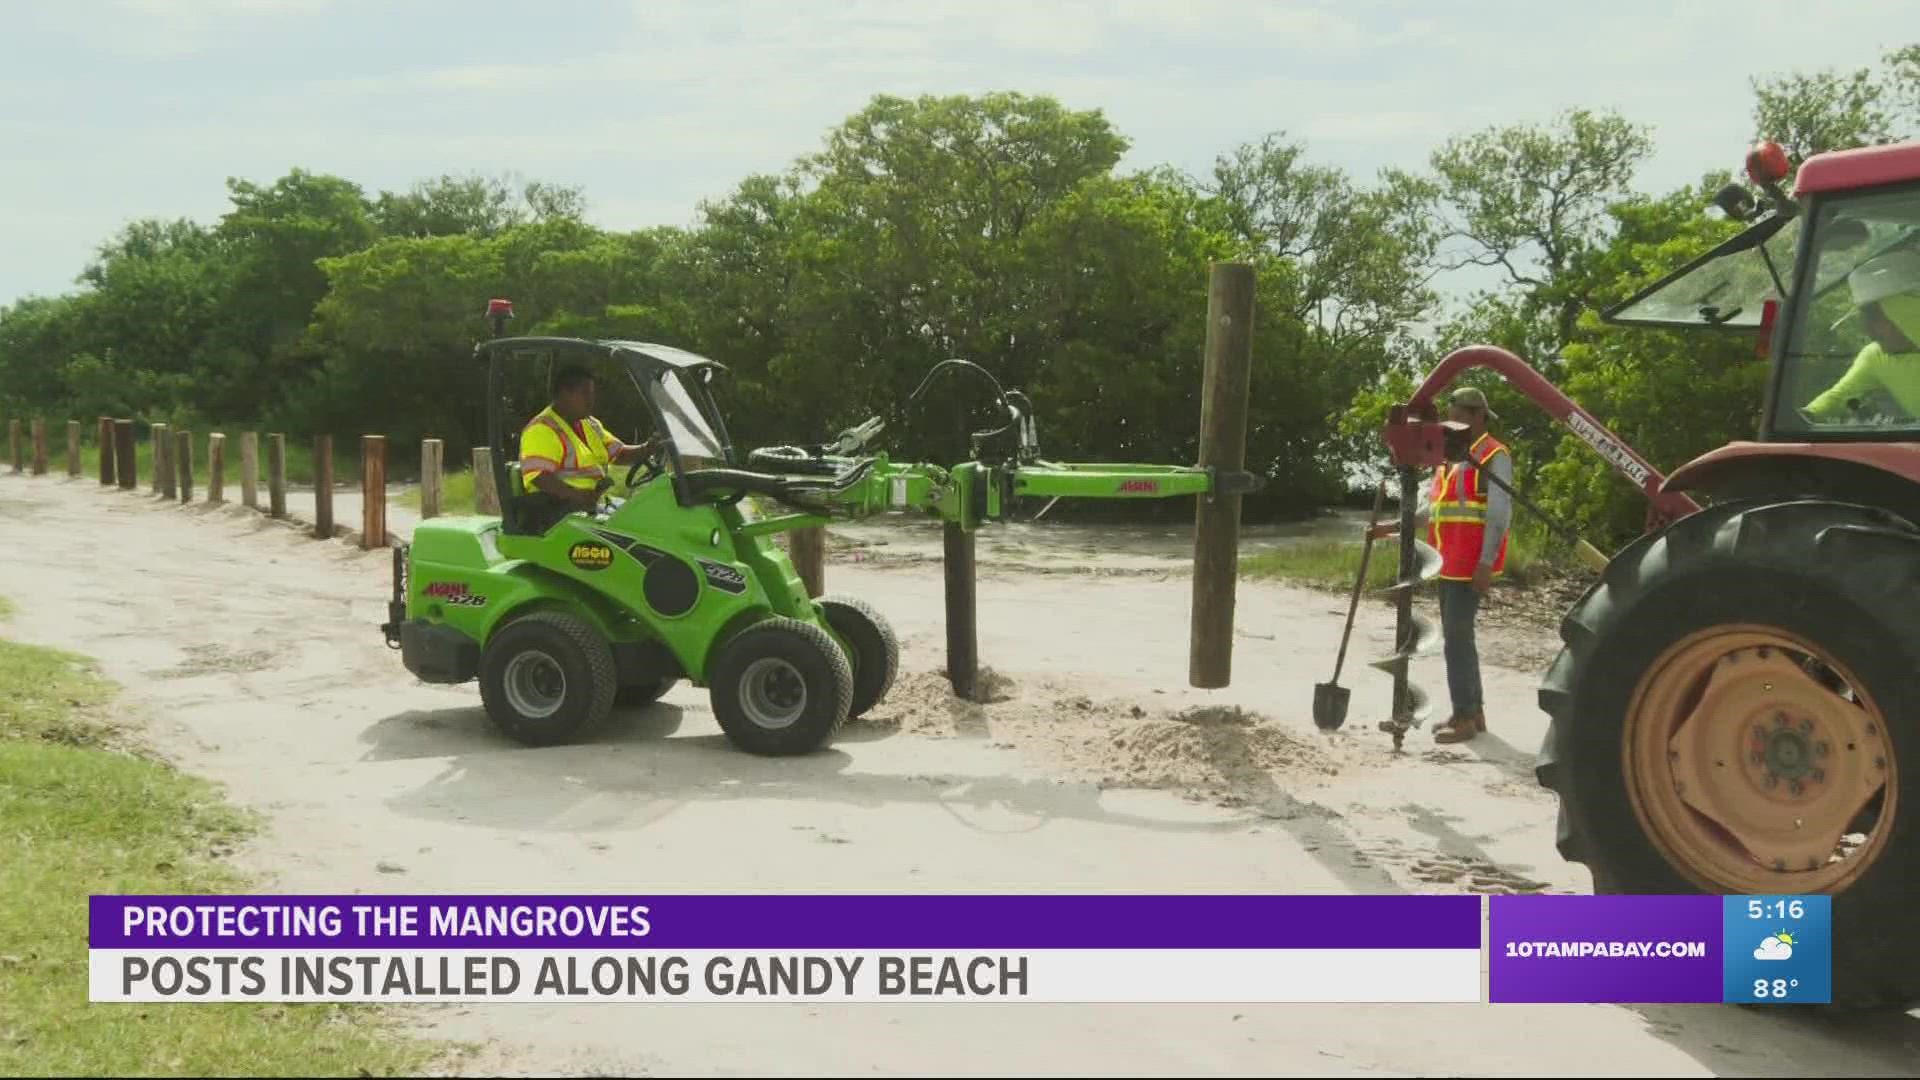 An average of 8,000 pounds of trash gets left behind on Gandy Beach each day. The new installations of posts hope to curb that problem.